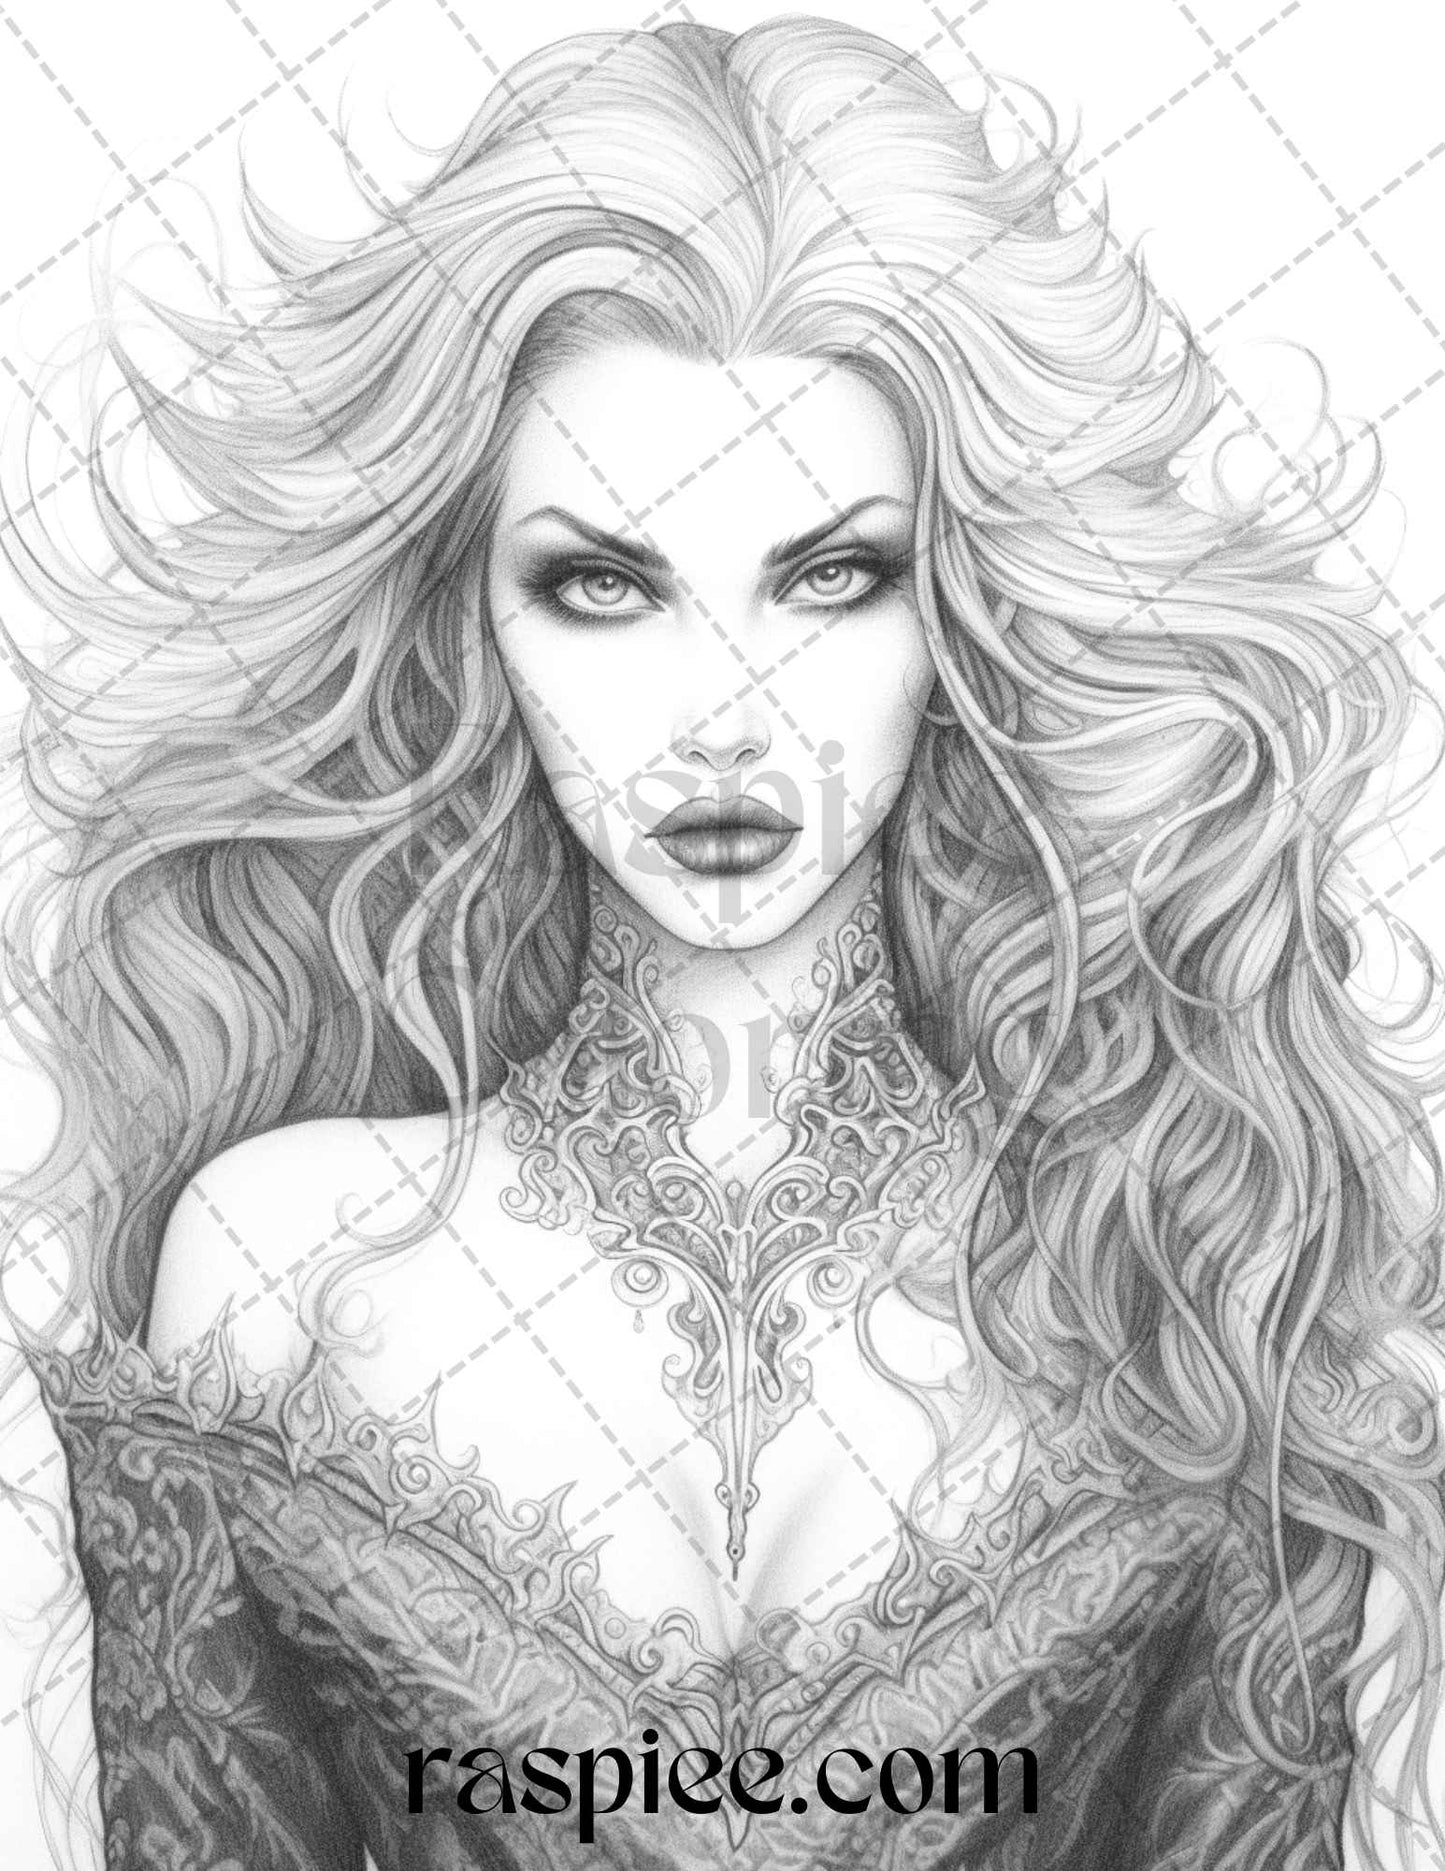 Bewitching Vampires Grayscale Coloring Pages Printable for Adults, PDF File Instant Download - raspiee